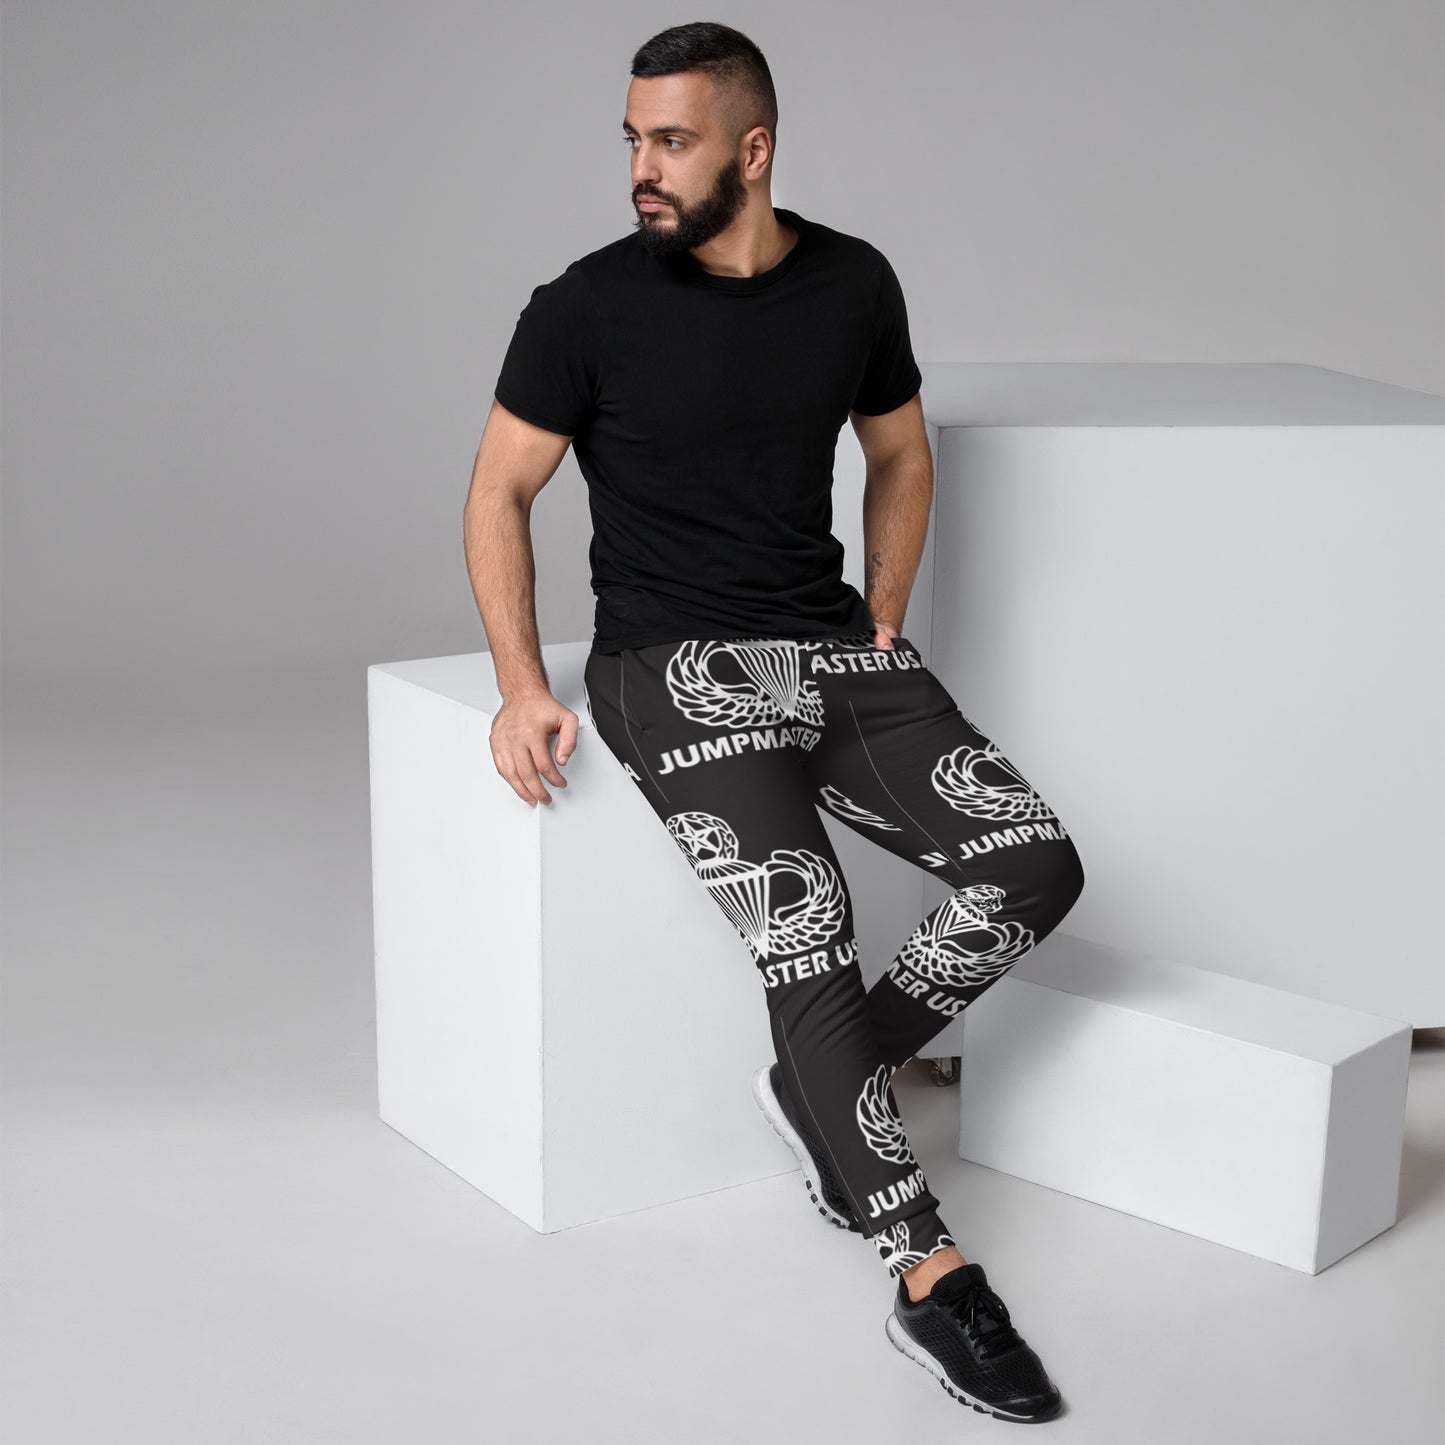 Look great at the on-post gym with these comfortable cotton blend joggers. They're soft on the outside, and even softer on the inside, so use them for a jog, or simply for lounging on the couch to binge your favorite show. These pants will catch all the attention.